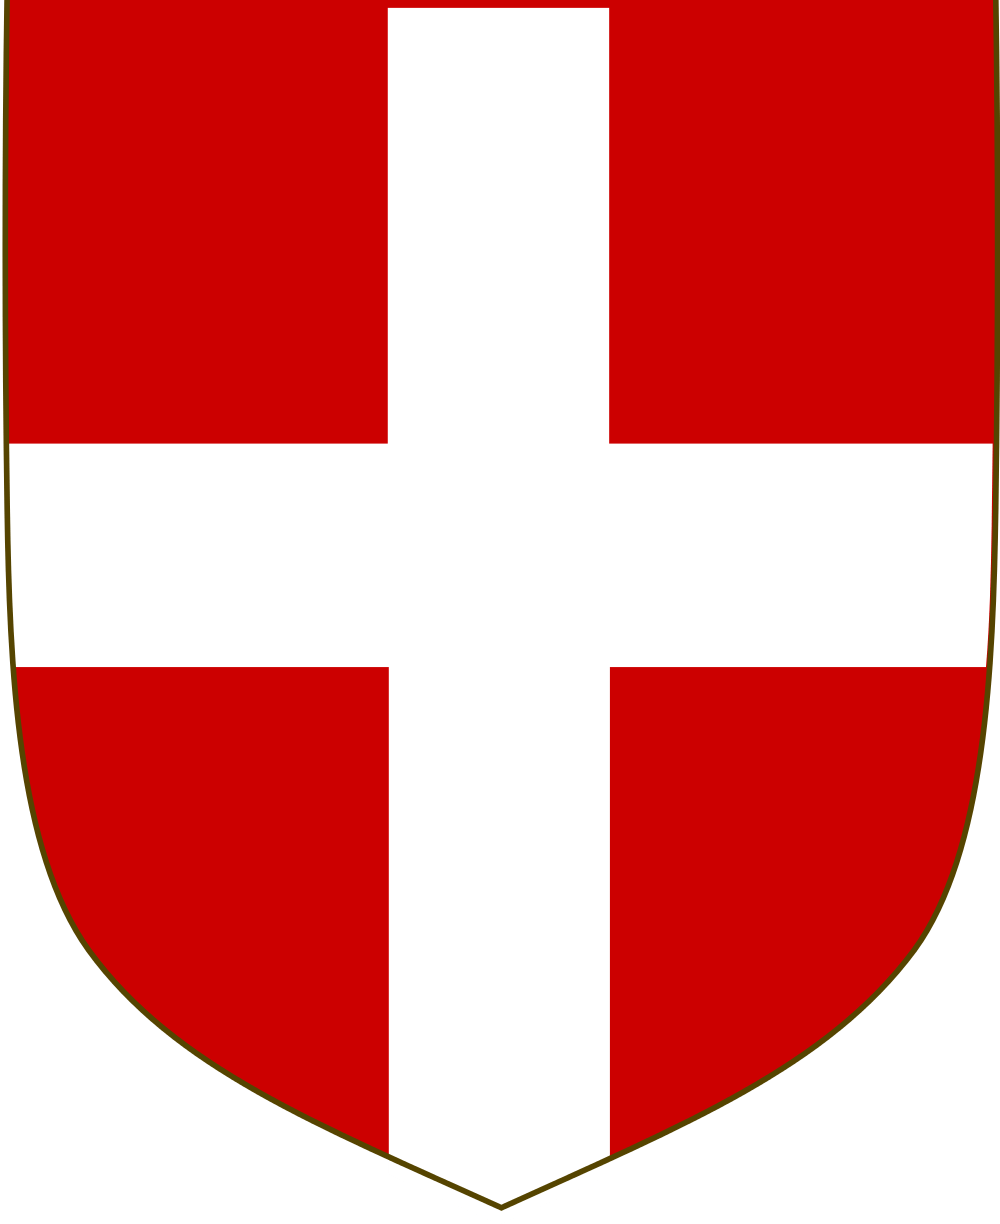 Red White Cross On Shield Logo - What is your national coat of arms/national emblem? : AskEurope